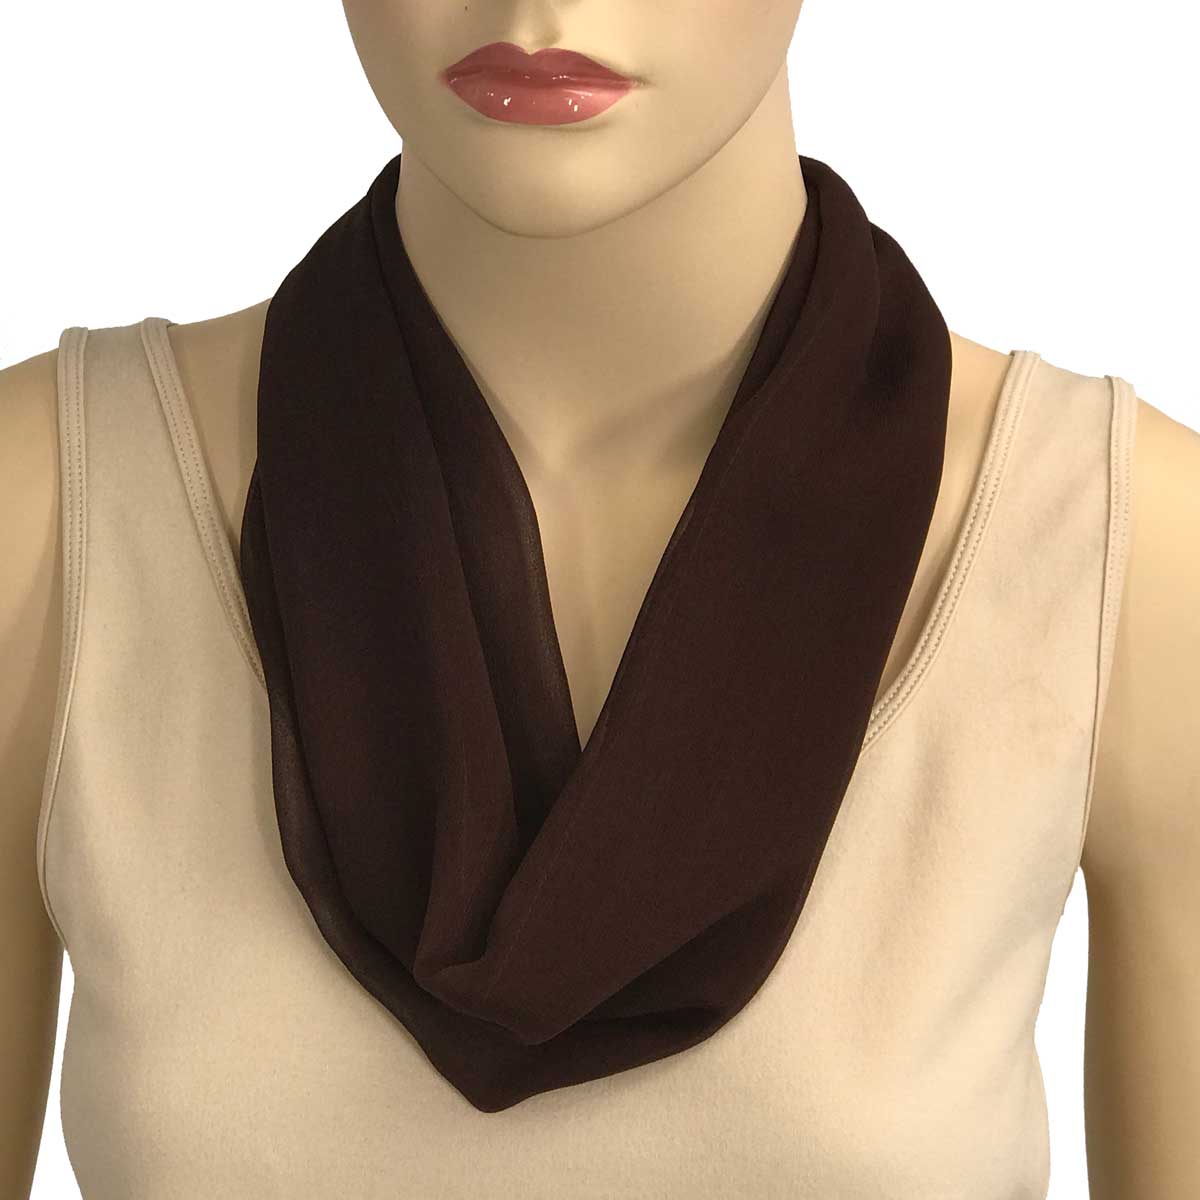 SDB - Solid Dark Brown<br>
Magnetic Clasp Silky Dress Scarf